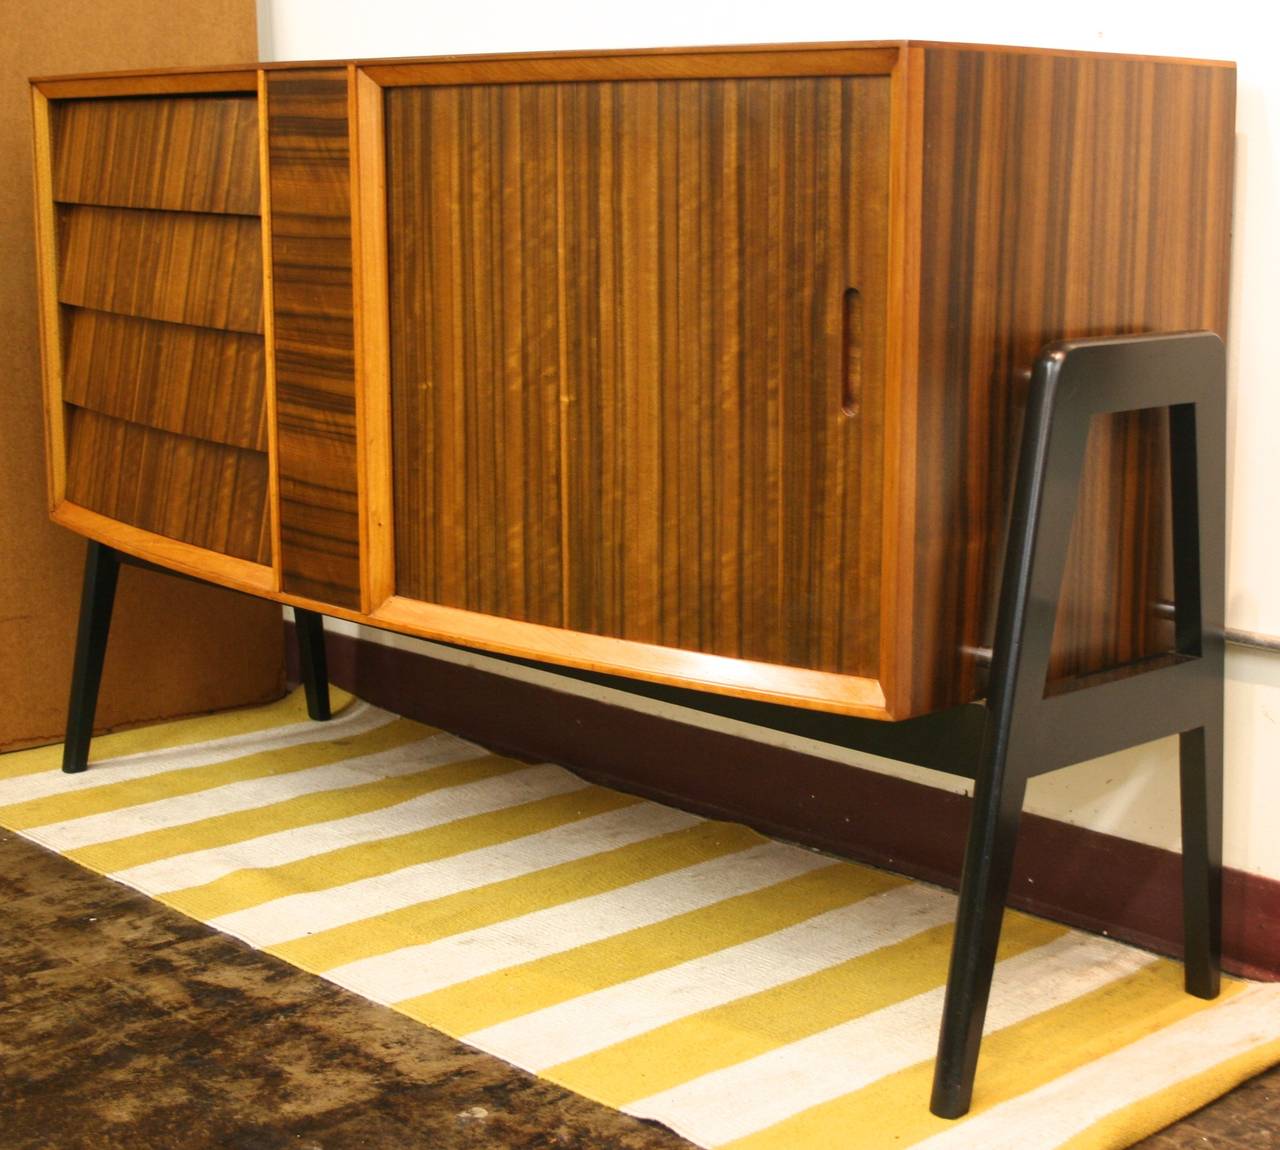 European Mid-Century Modern Credenza with Curved Front and Tambour Door